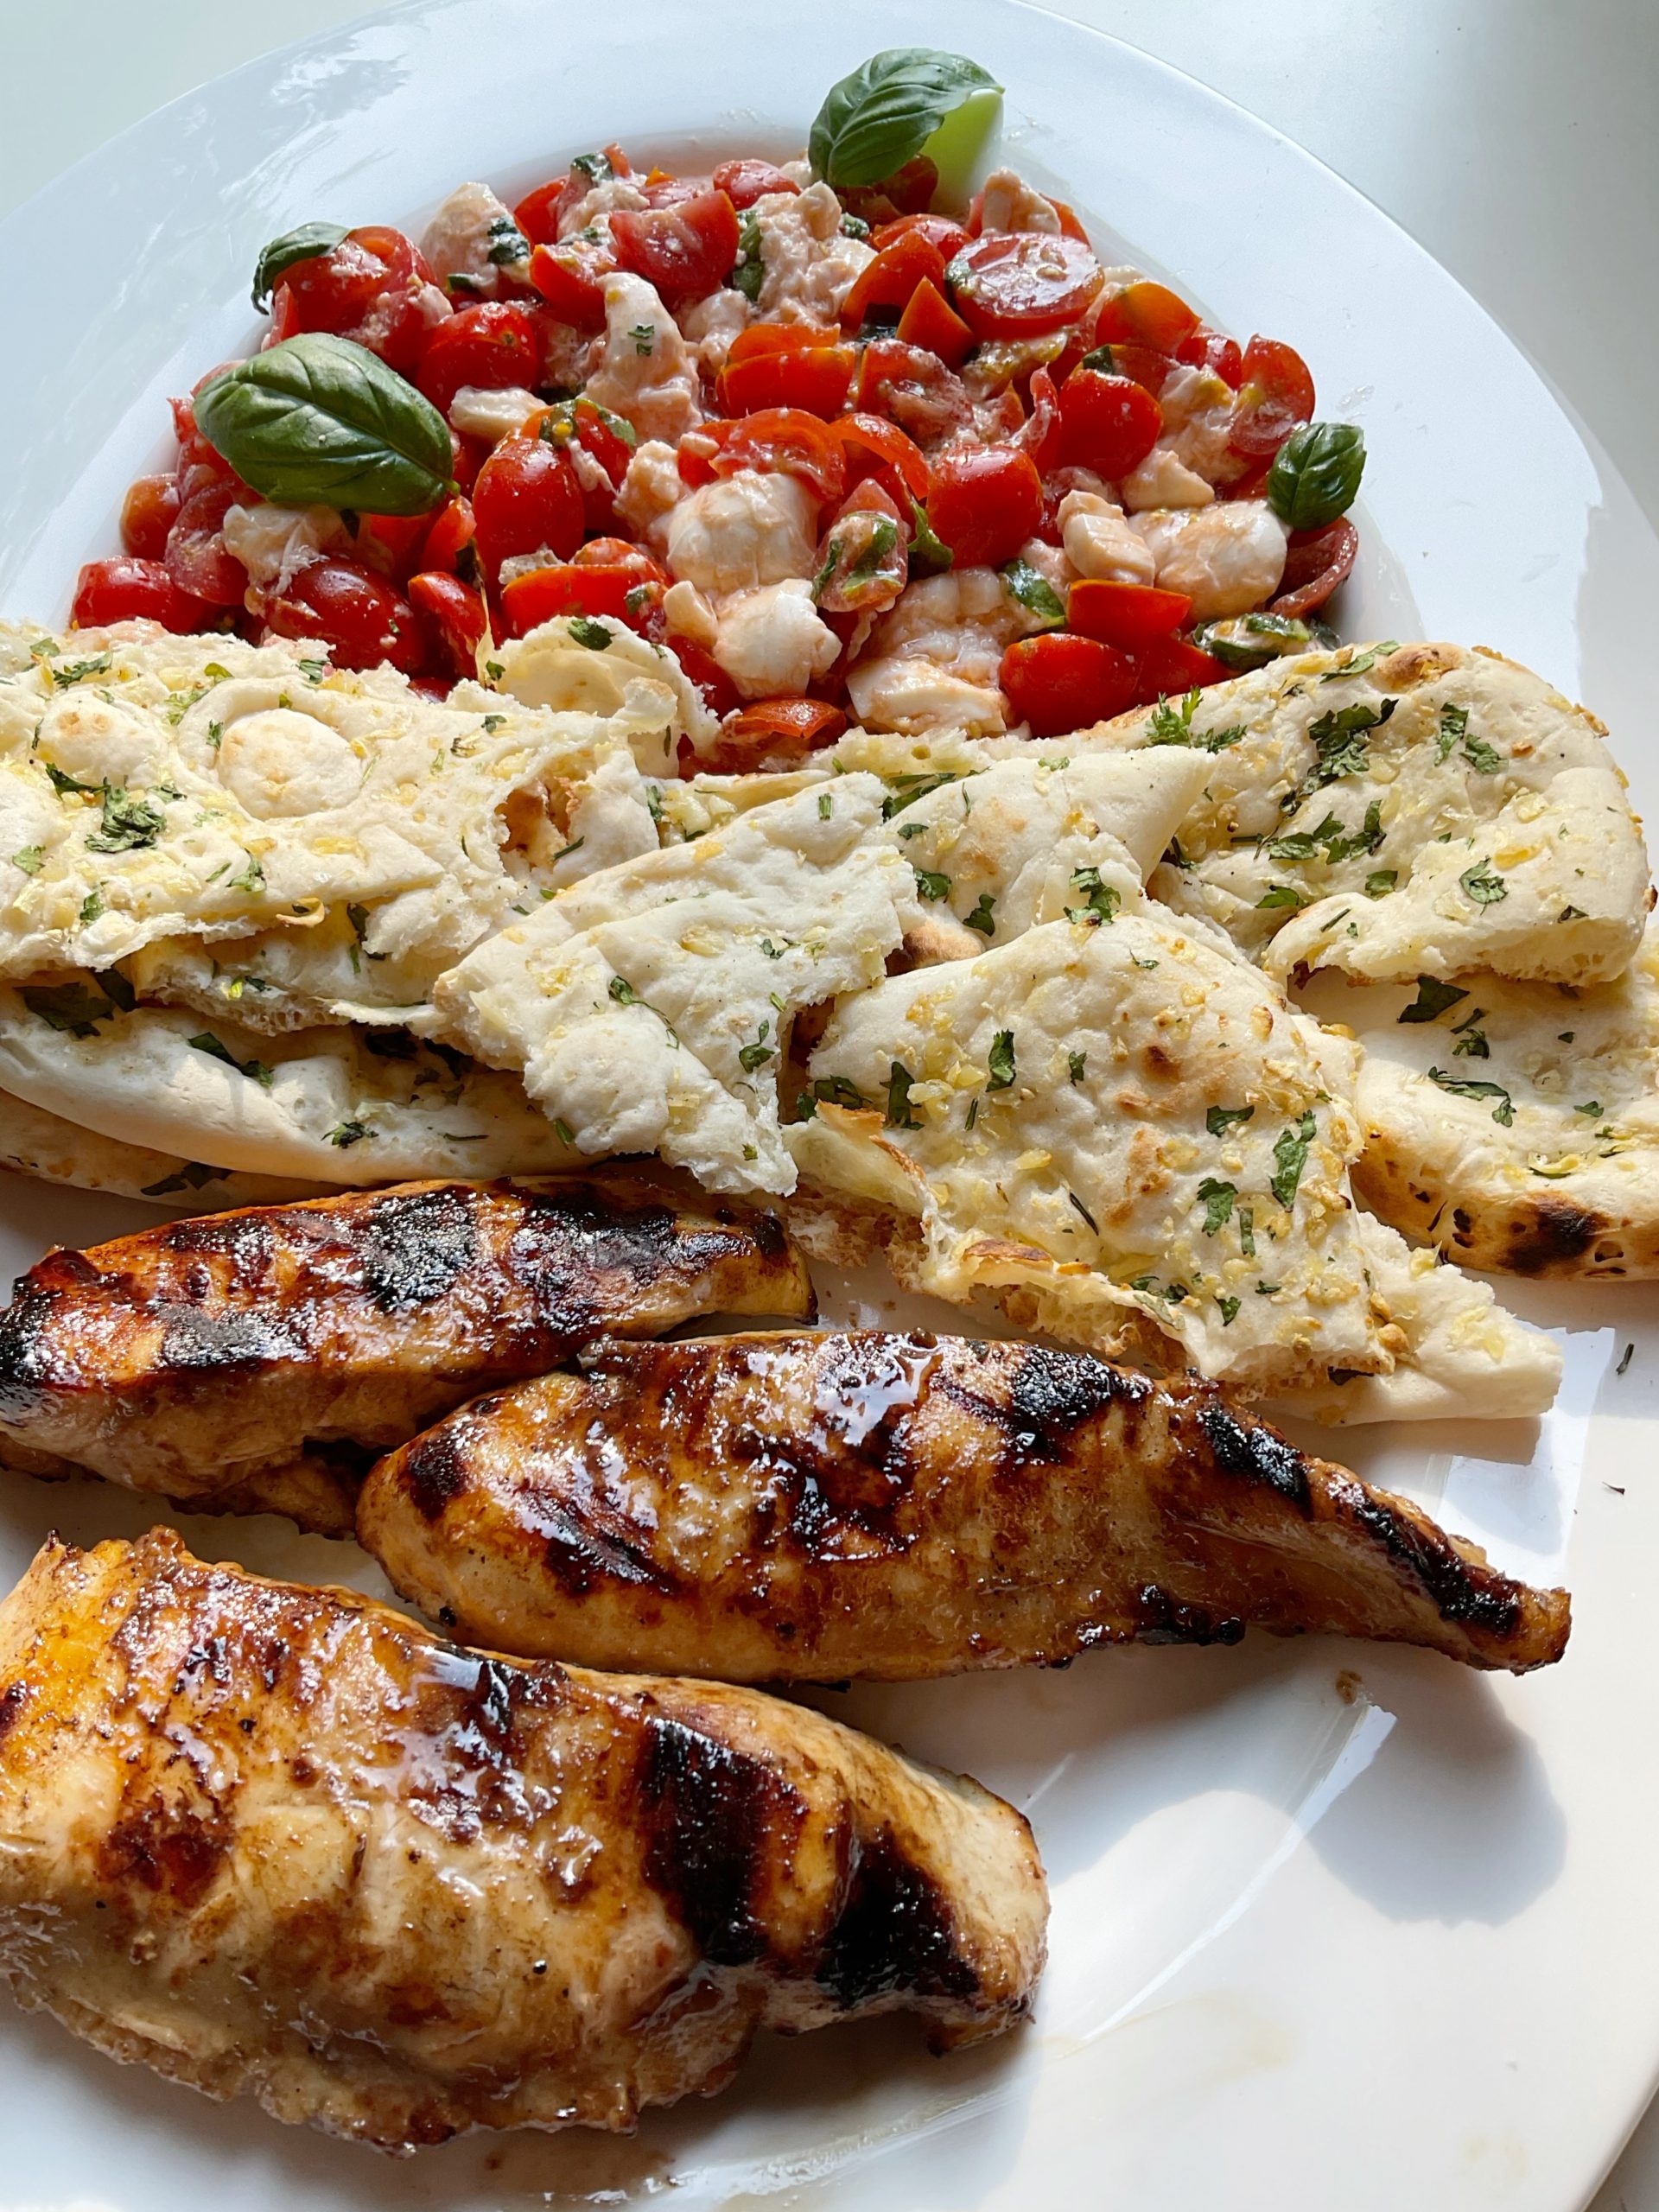 CAPRESE AND GRILLED BALSAMIC CHICKEN WITH GARLIC NAAN